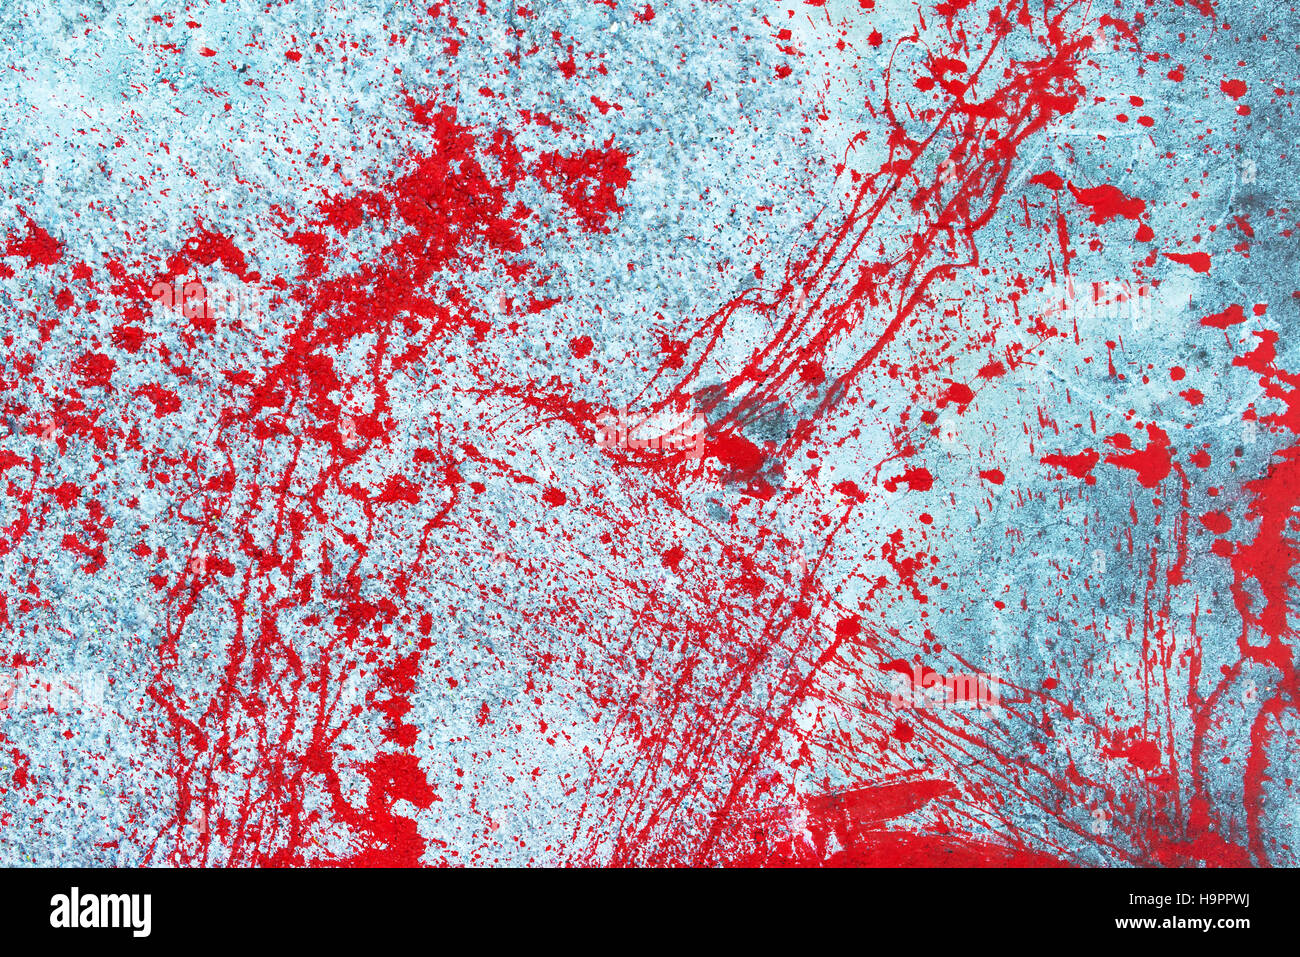 Red blood paint splatter, splash and spray on wall Stock Photo